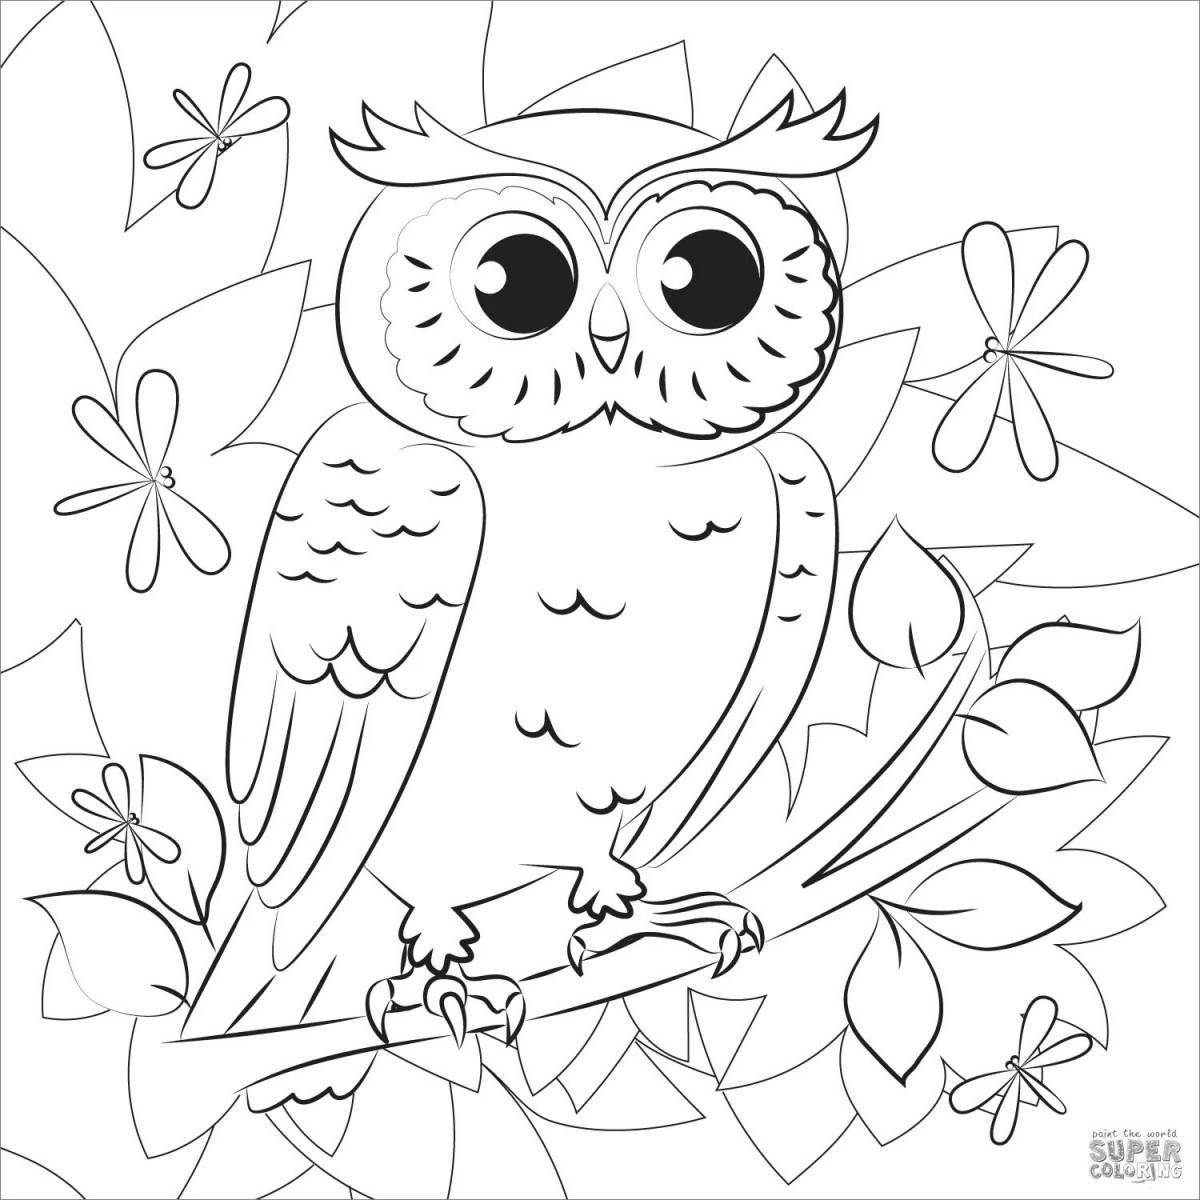 Charming owl coloring book for 3-4 year olds